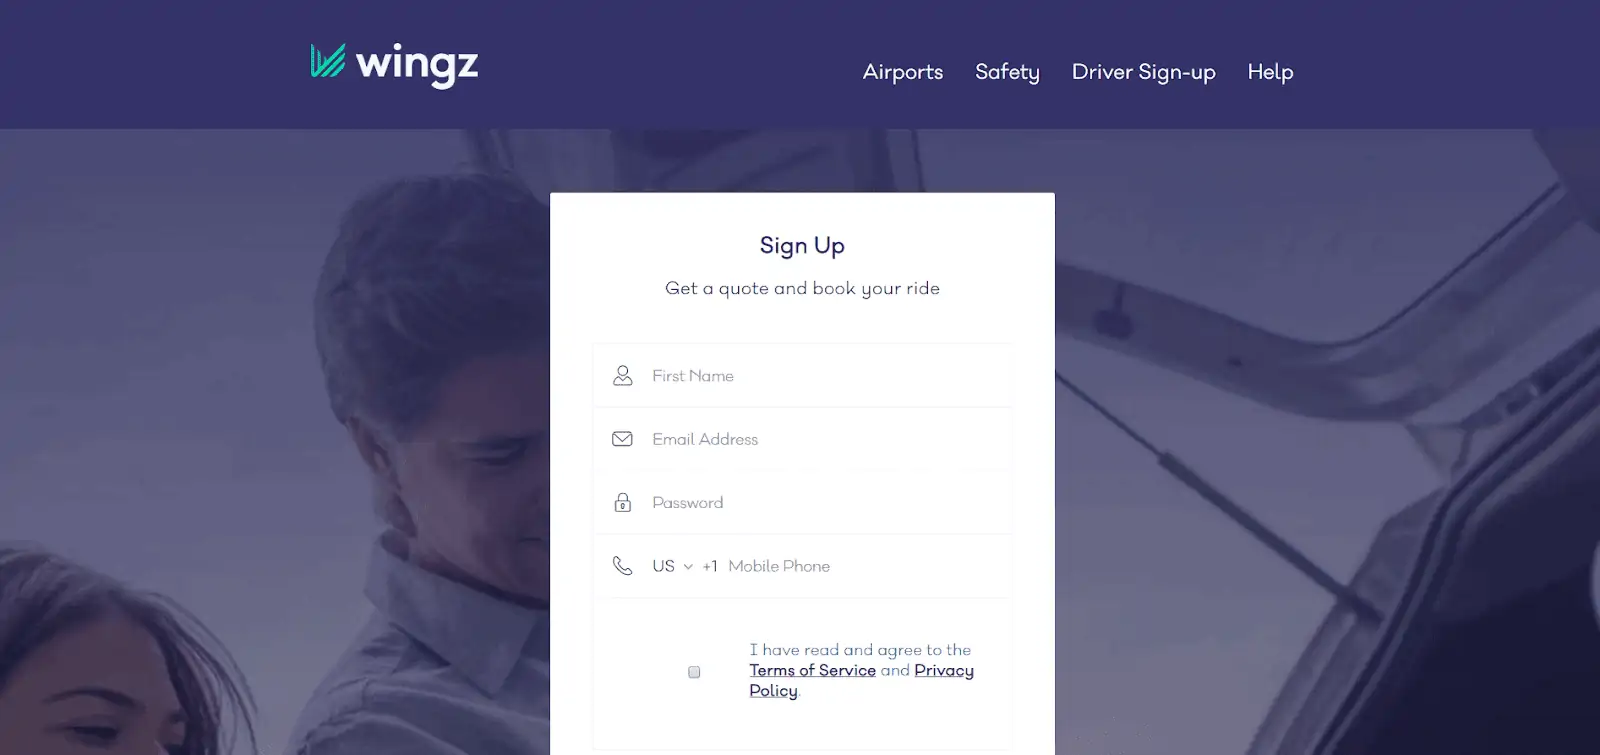 final image for how to sign up for wingz service